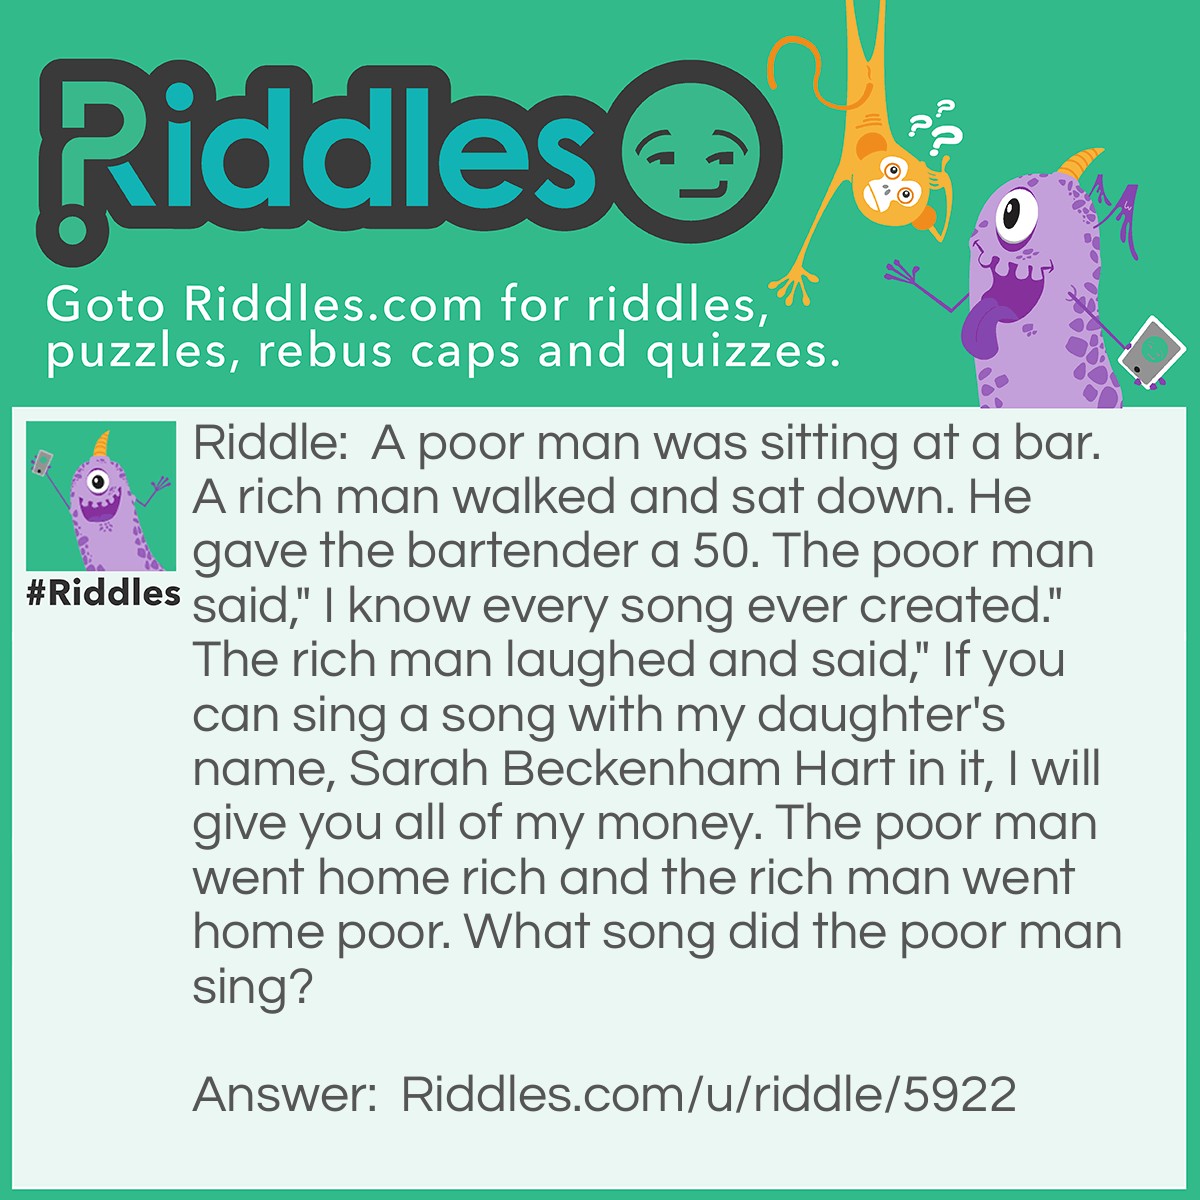 Riddle: A poor man was sitting at a bar. A rich man walked and sat down. He gave the bartender a 50. The poor man said," I know every song ever created." The rich man laughed and said," If you can sing a song with my daughter's name, Sarah Beckenham Hart in it, I will give you all of my money. The poor man went home rich and the rich man went home poor. What song did the poor man sing? Answer: Happy Birthday.